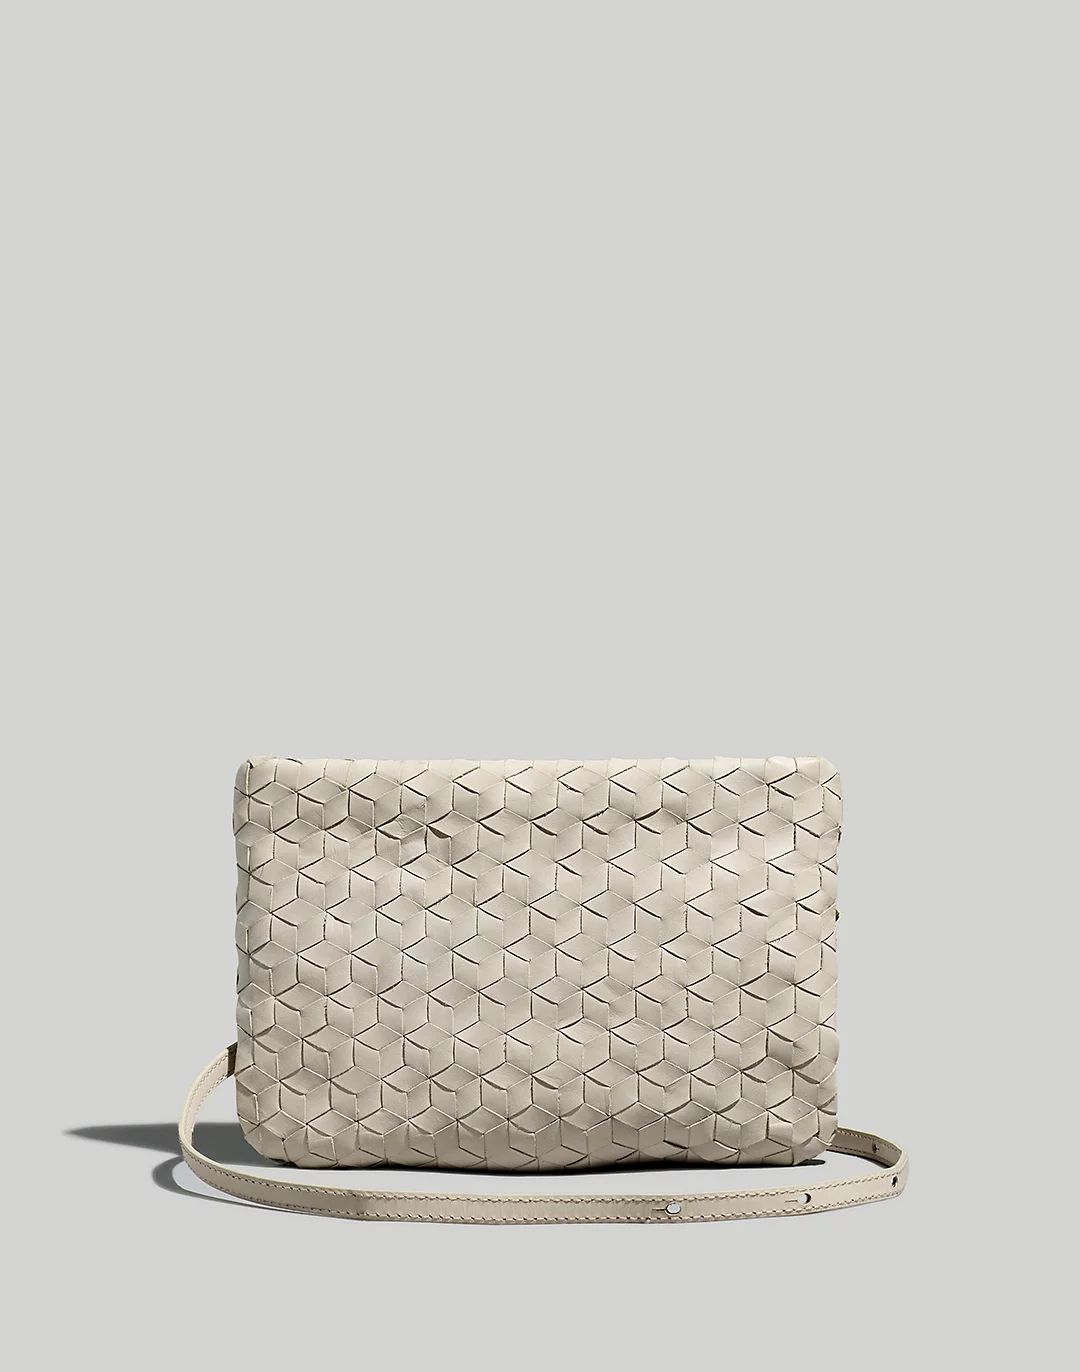 The Puff Crossbody Bag: Woven Leather Edition | Madewell